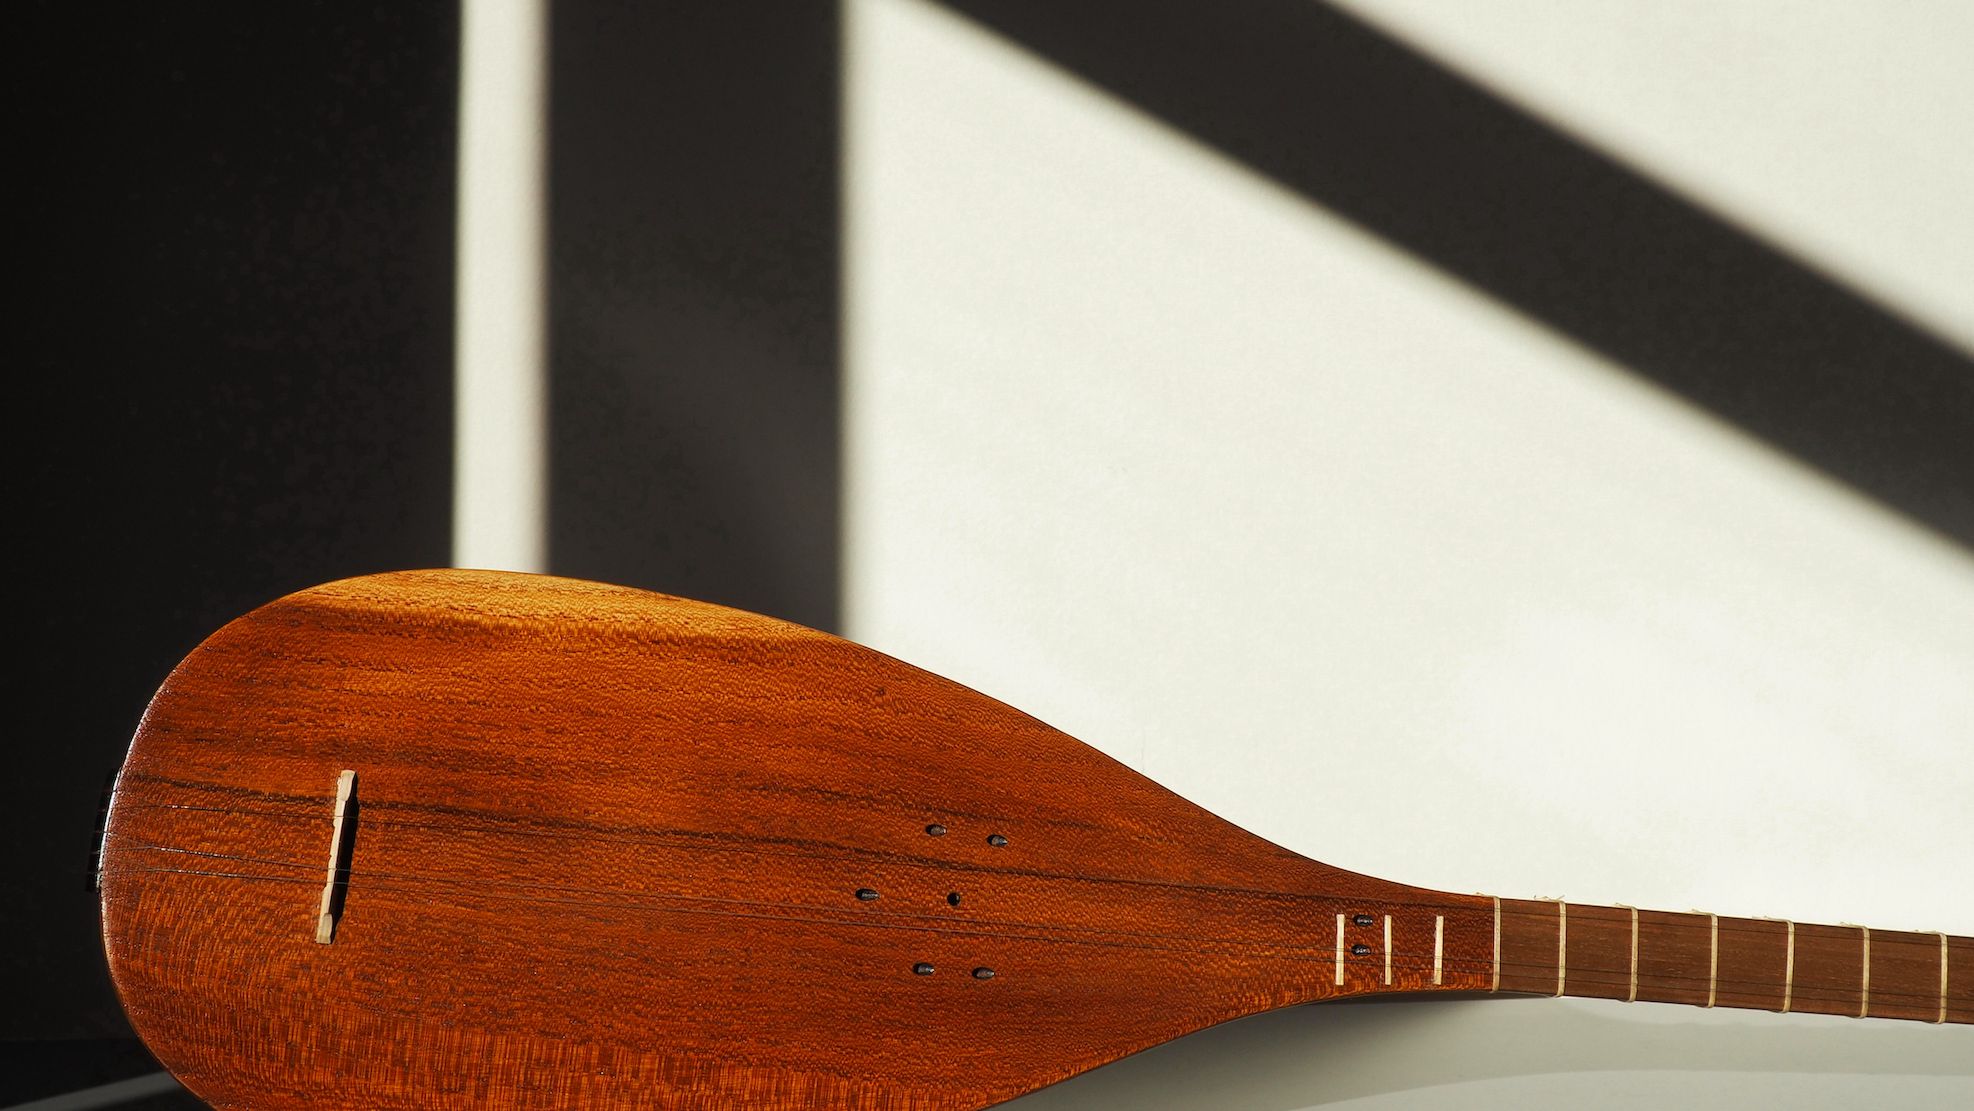 Close up of a traditonal string music instrument that looks like an oud. It is pictured string-less